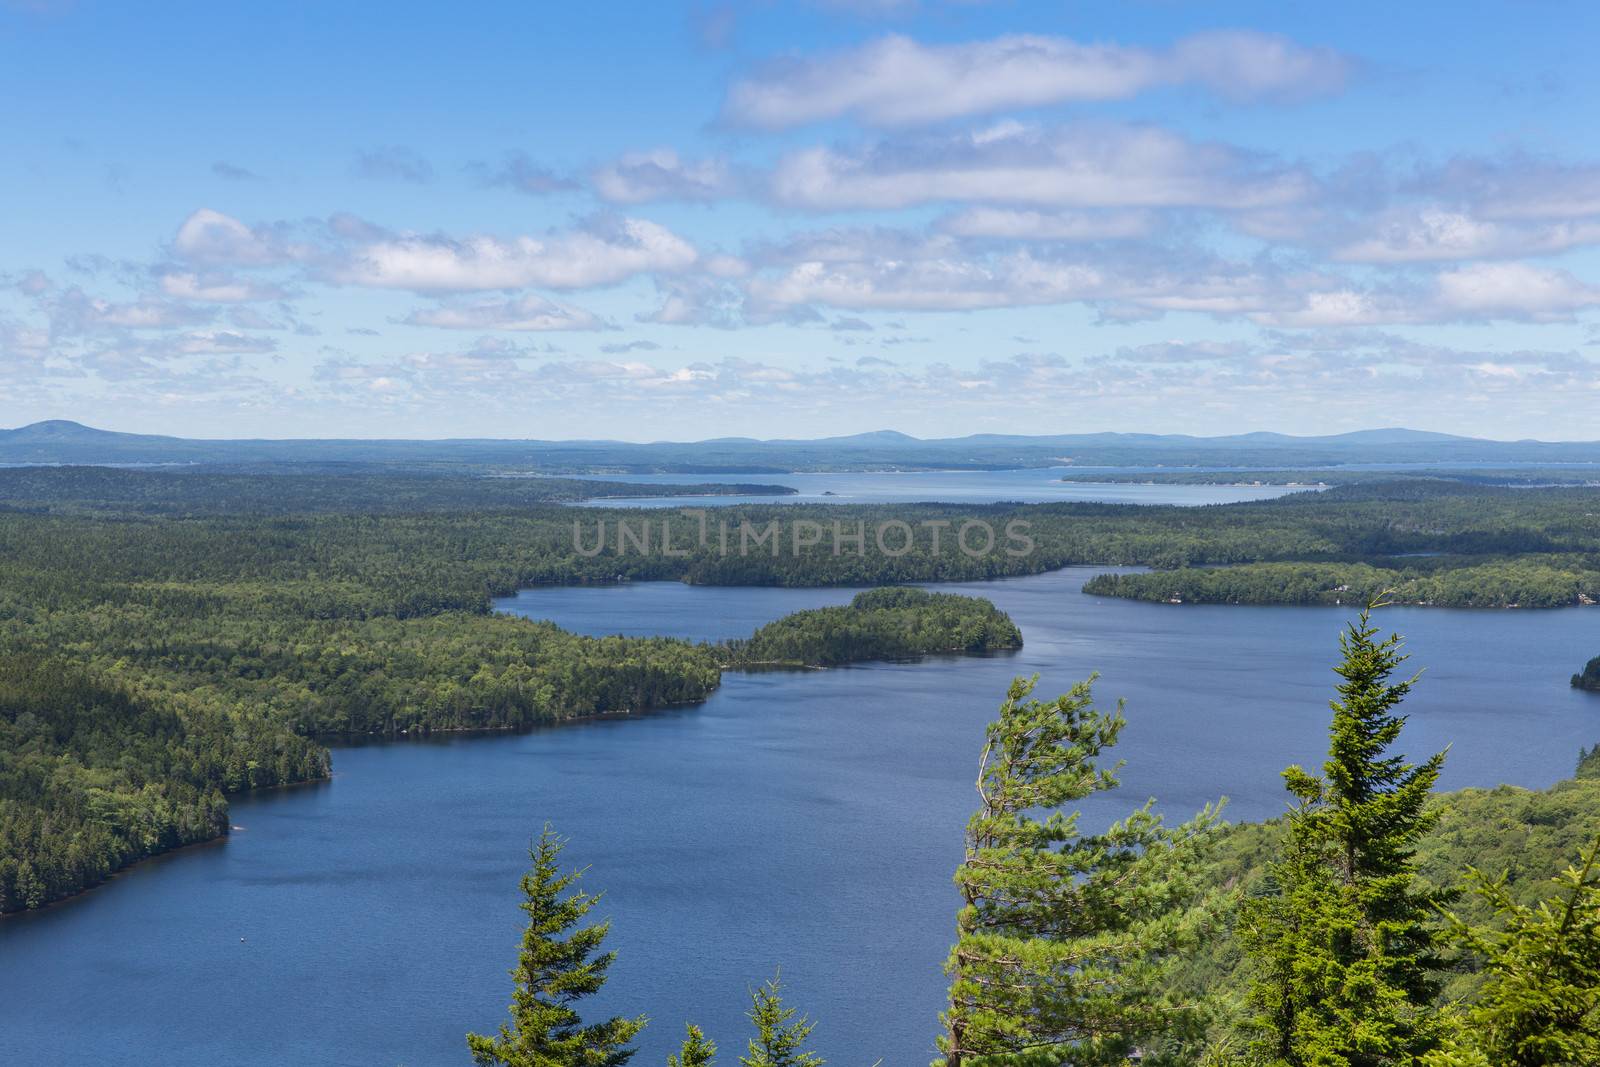 This is a view from the side of Beech Mountain looking across Echo Lake and Mount Desert Island to the Maine mainland.